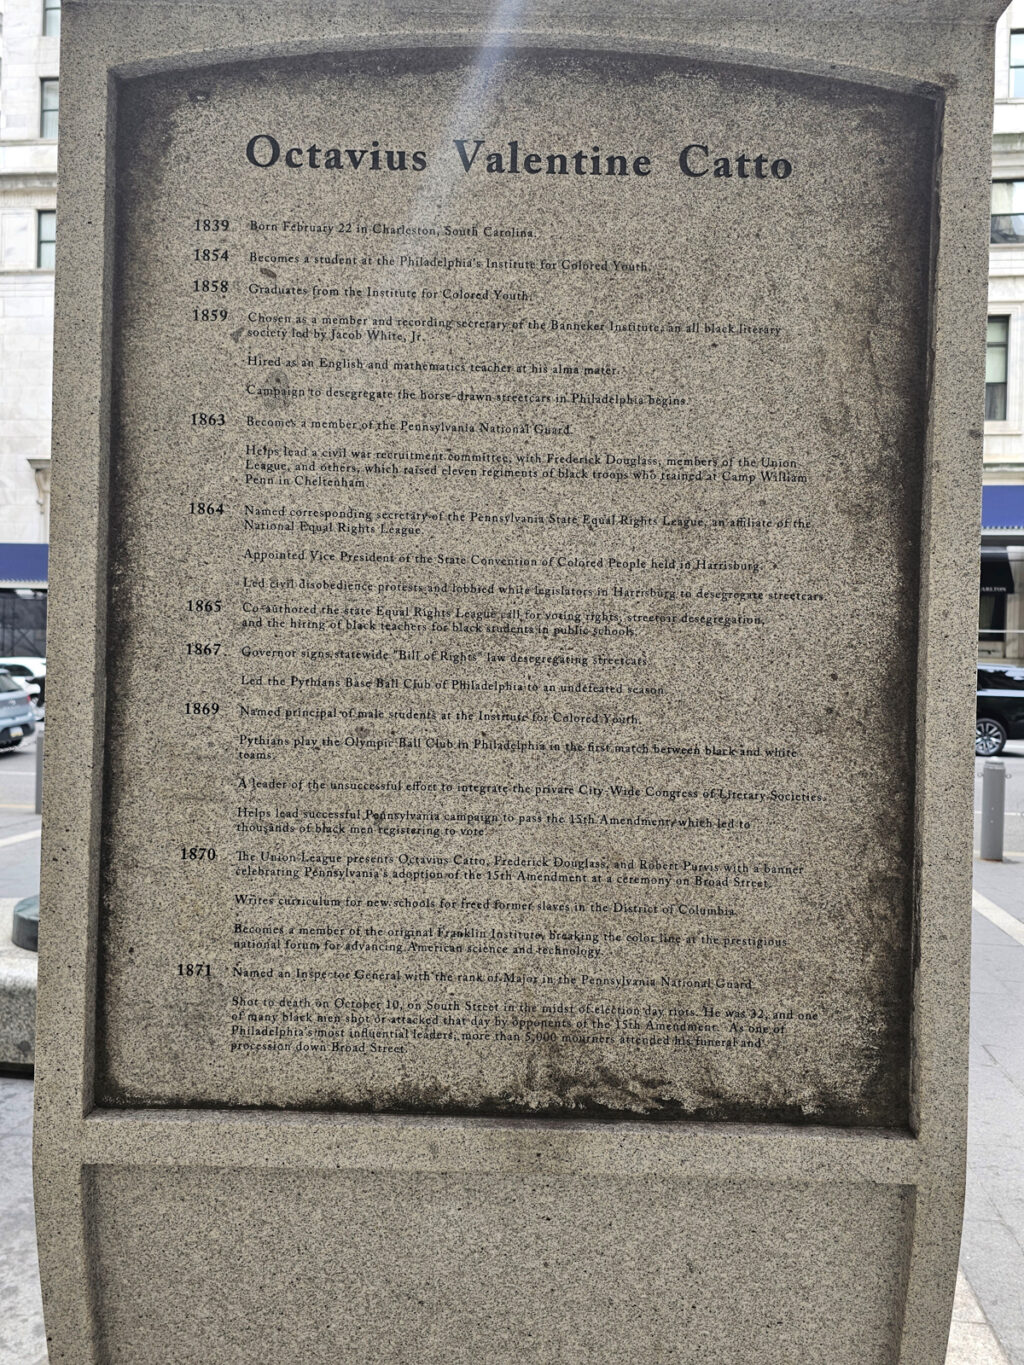 Stone plaque describing a timeline Catto's life from 1839 to 1871